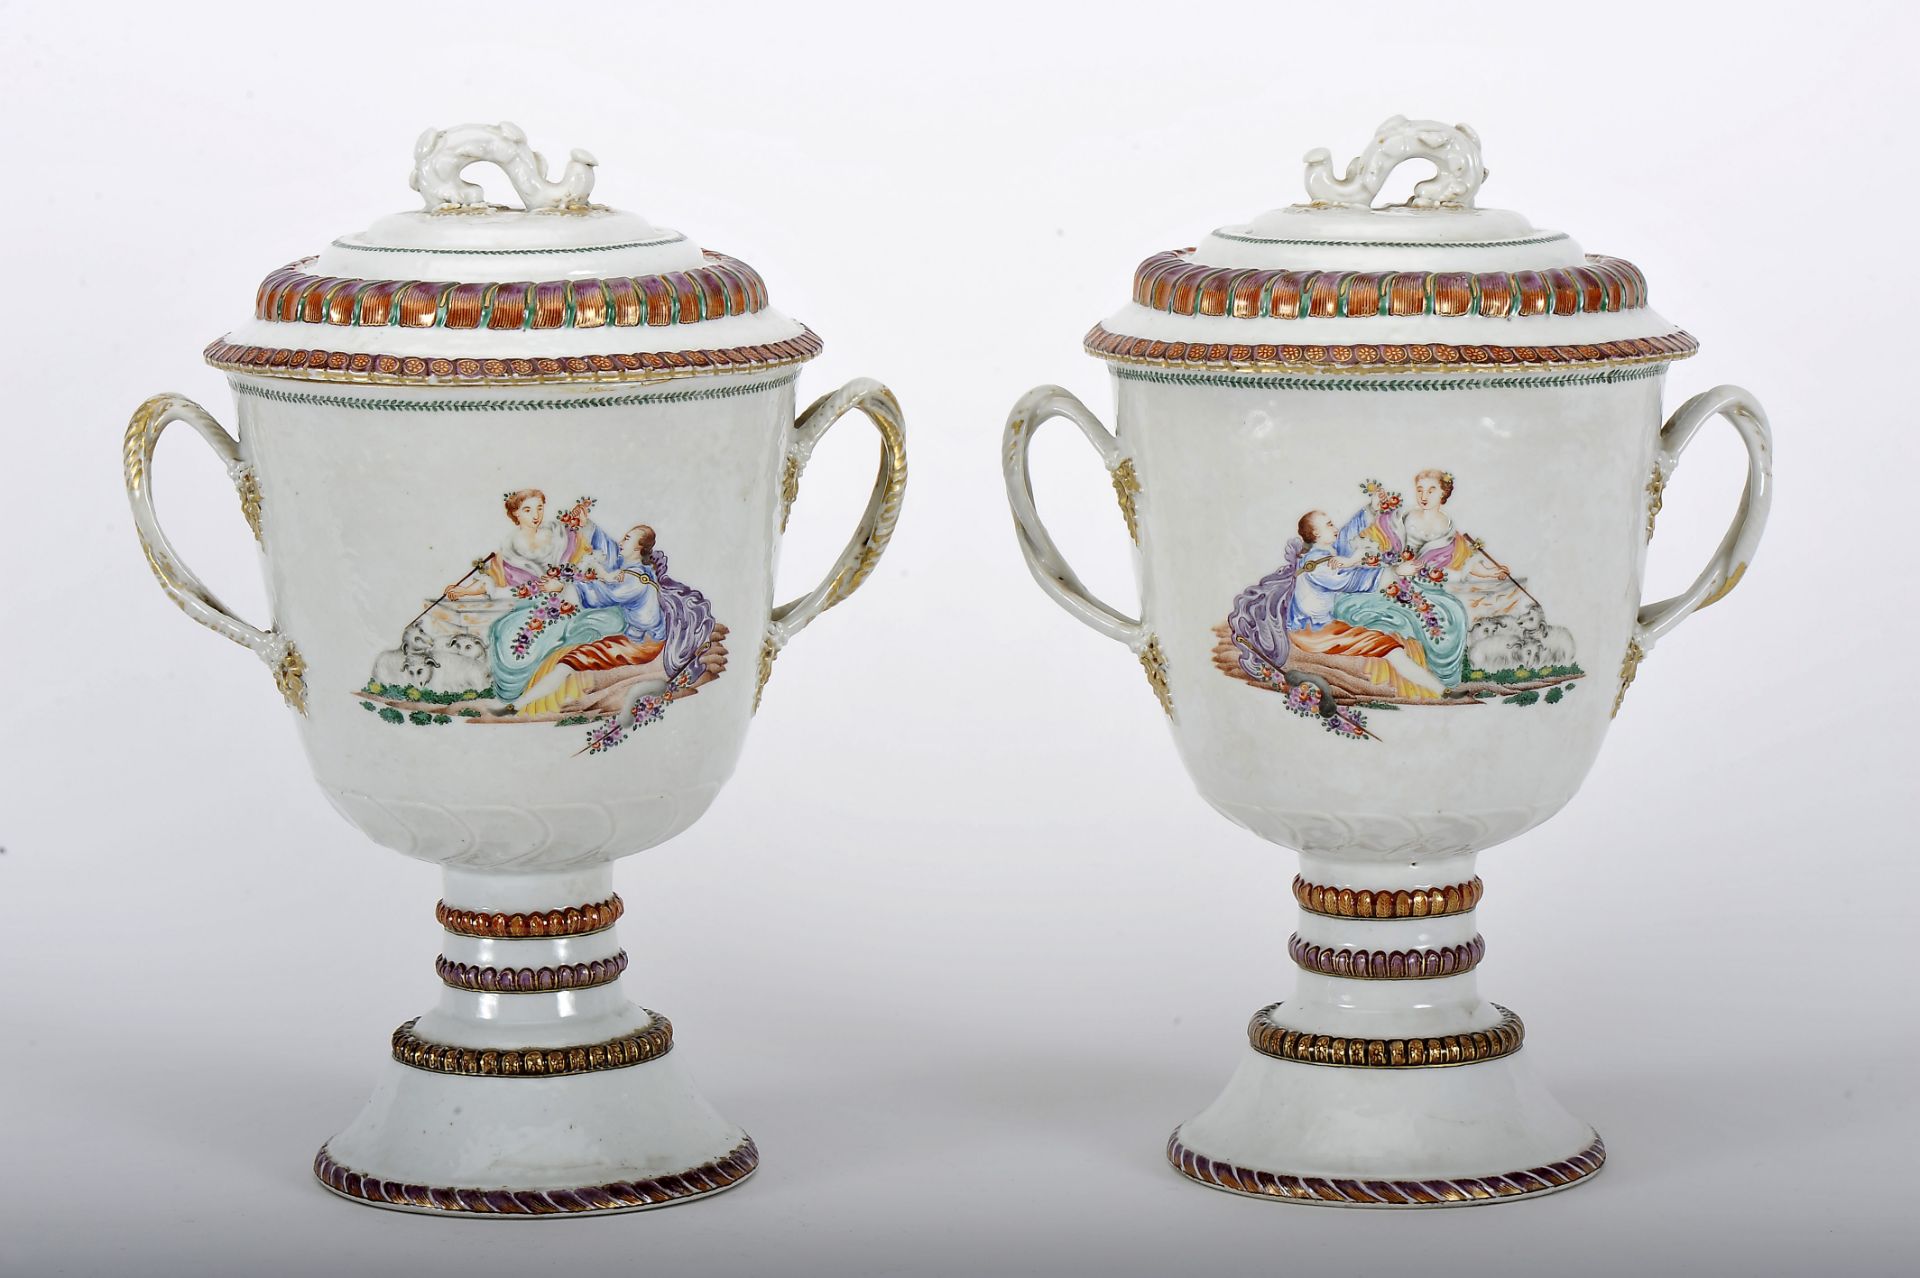 A Pair of Urns with Covers - Image 2 of 3